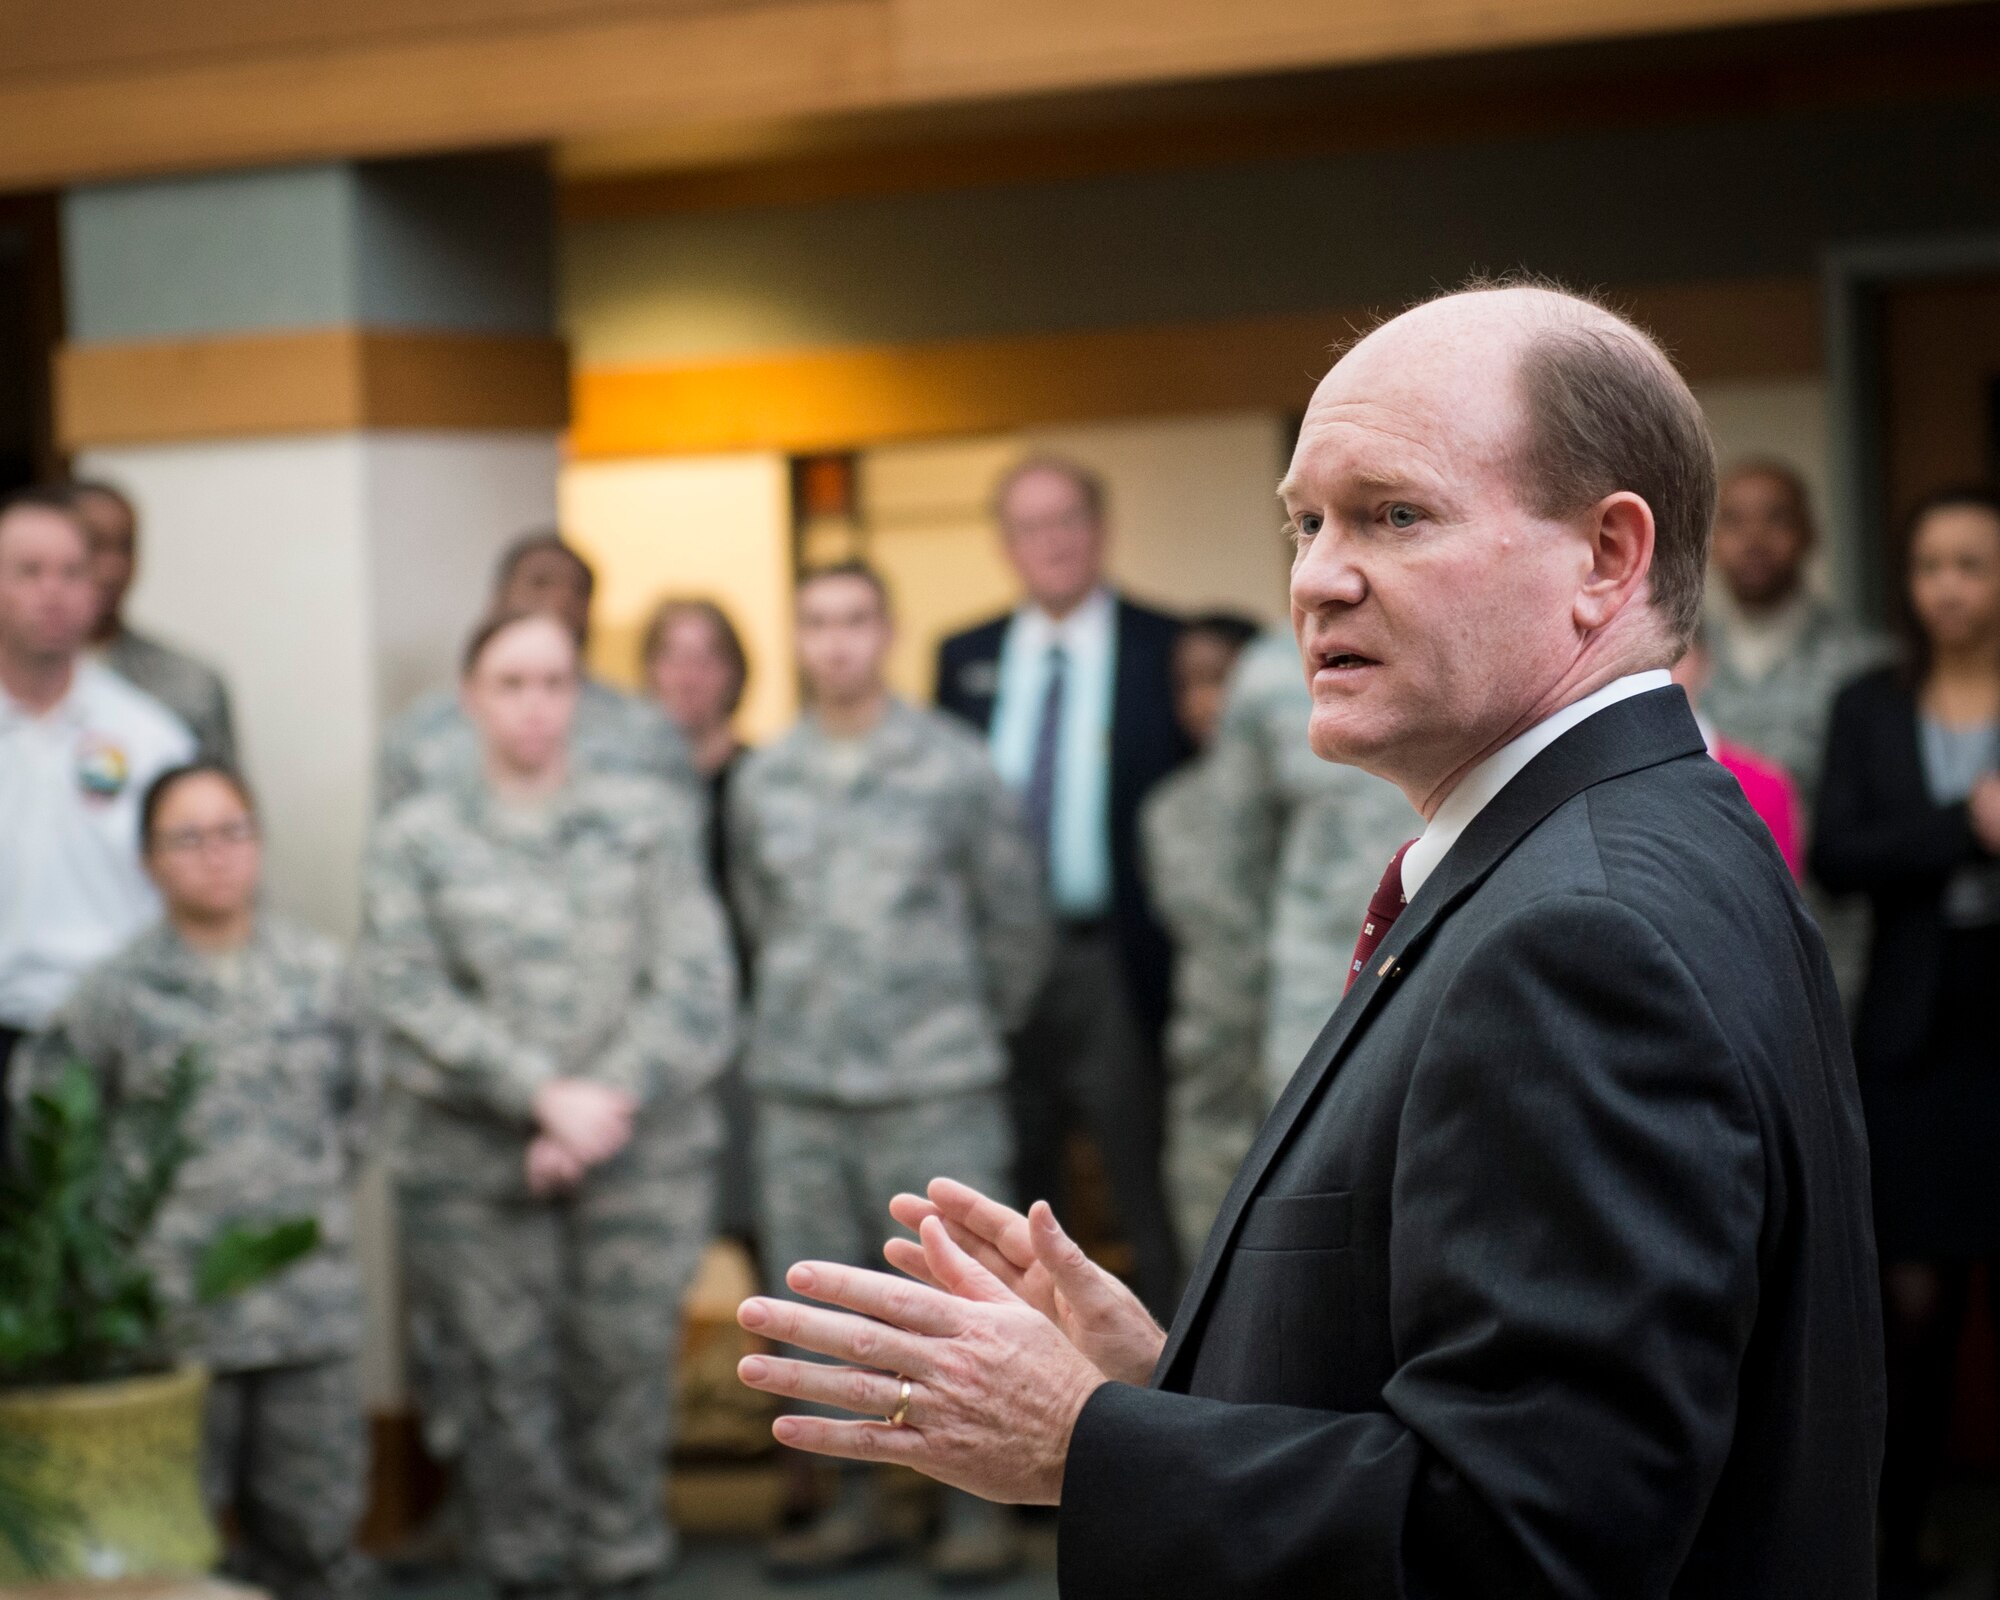 Sen. Chris Coons of Delaware addresses Airmen from Air Force Mortuary Affairs Operations, Dover Air Force Base, Del., Feb. 9, 2015, during a visit to the mortuary. The senator thanked AFMAO for its continued commitment to returning all fallen U.S. service members with dignity, honor and respect. (U.S. Air Force photo by Capt. Ray Geoffroy)